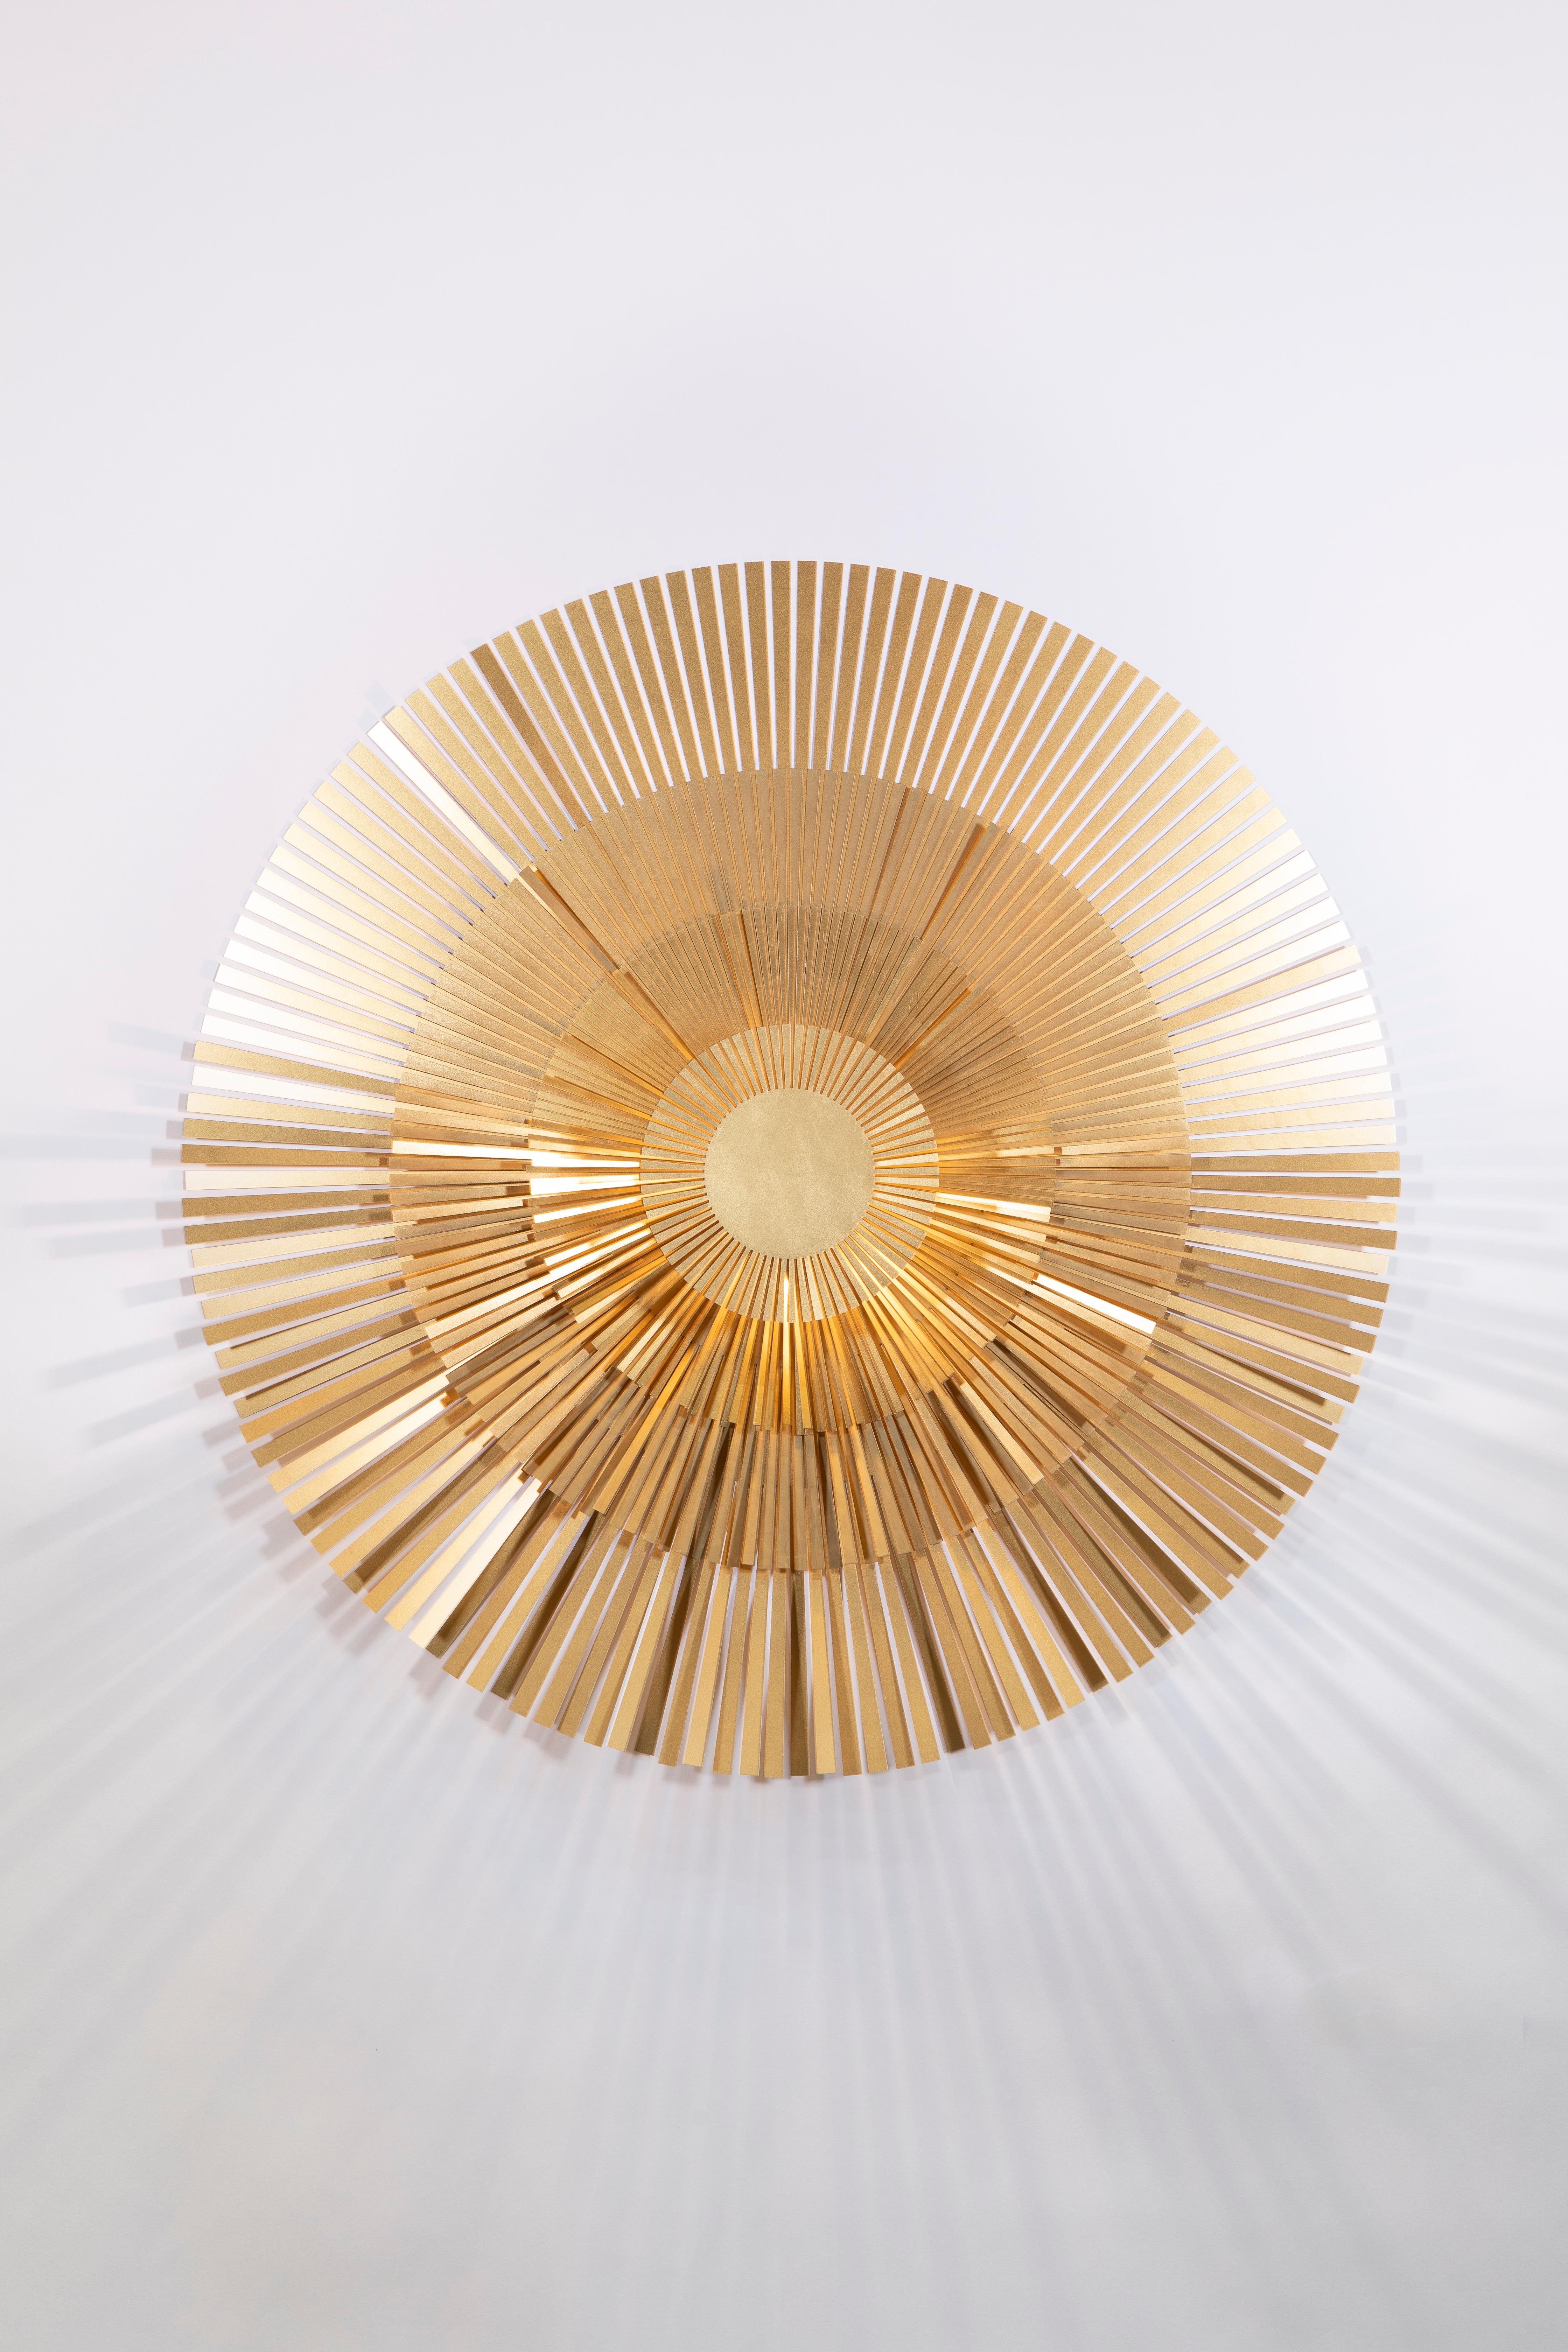 Since the origin of Radar Interiors the founder, designer Bastien Taillard, has chosen to work on essential lines and a meticulous re-visitation of shapes combined with an in-depth research of materials. The new Lafayette lamp, which had its preview